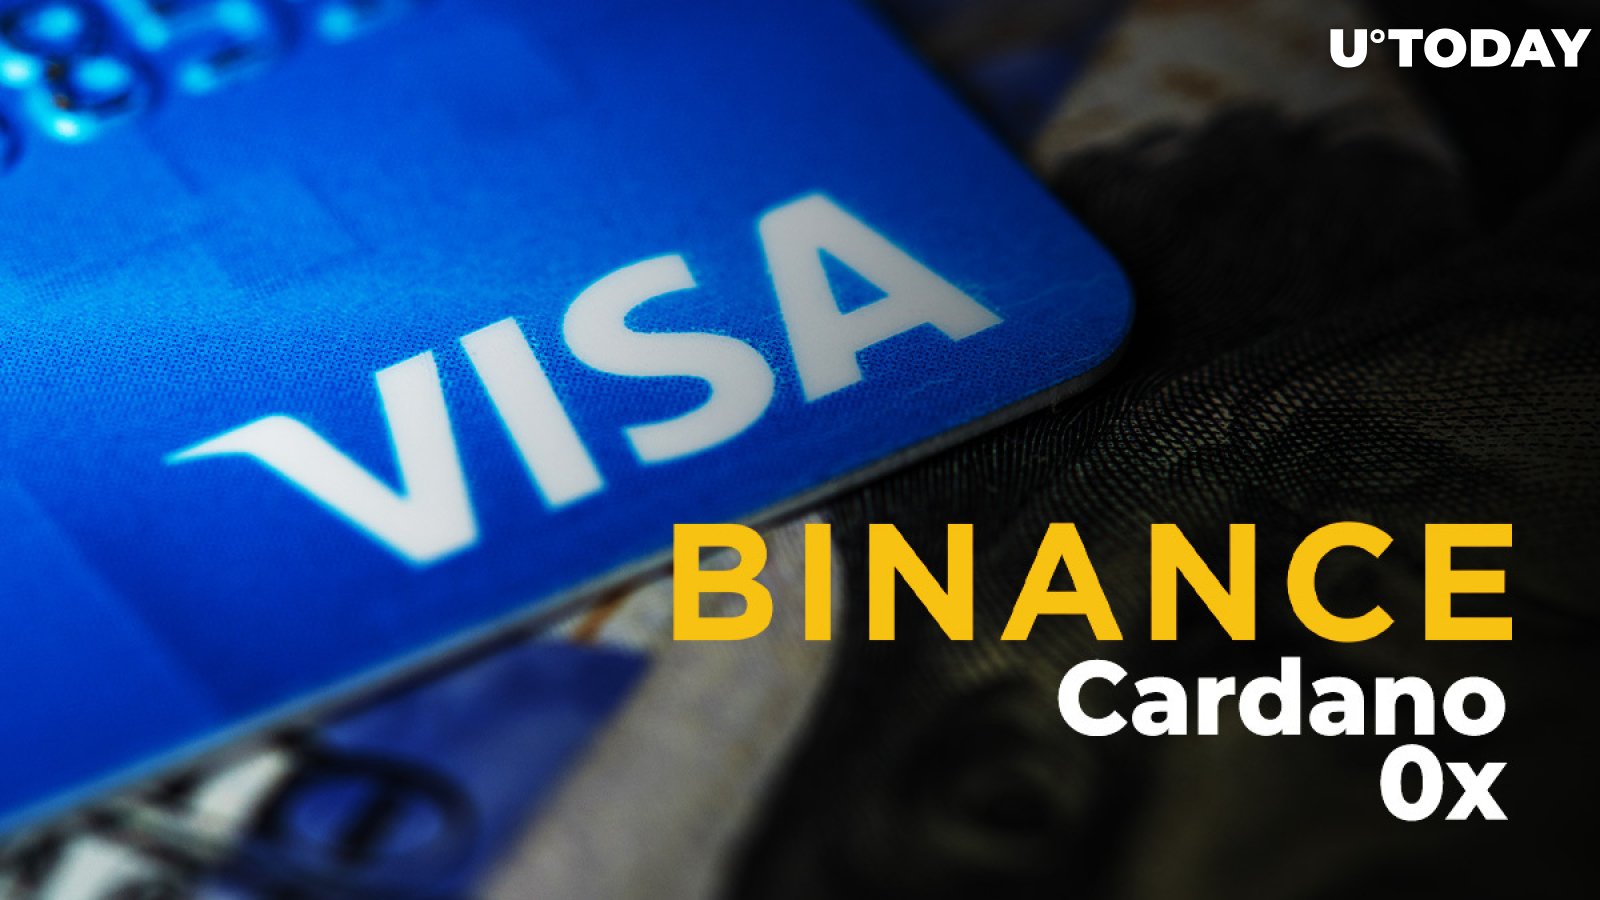 Binance.US Users Can Now Buy Cardano (ADA) and 0x (ZRX) in Seconds with Visa Card